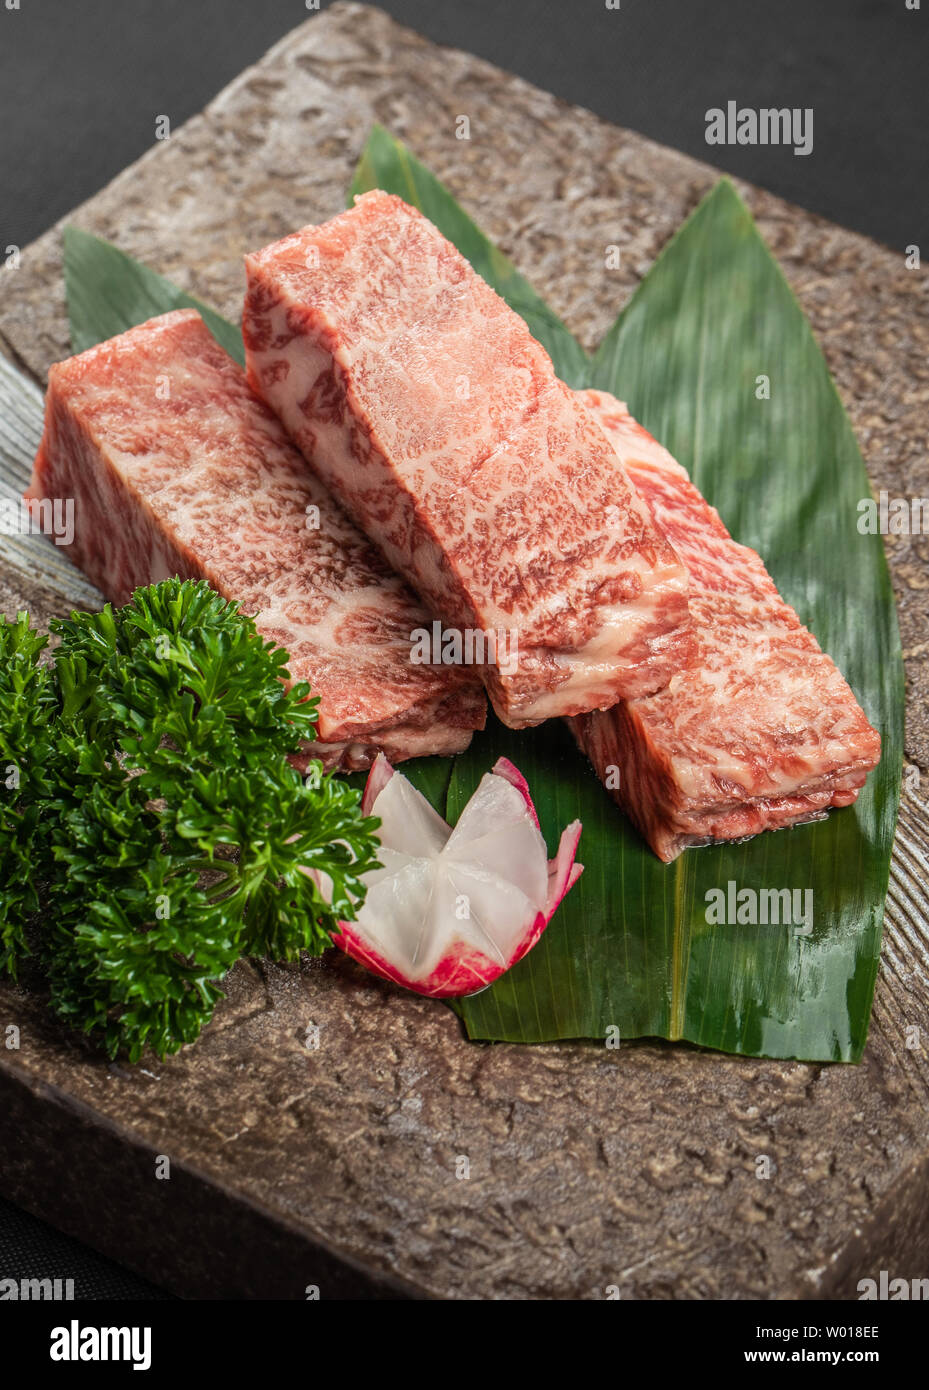 Japanese beef barbecue ingredients Stock Photo